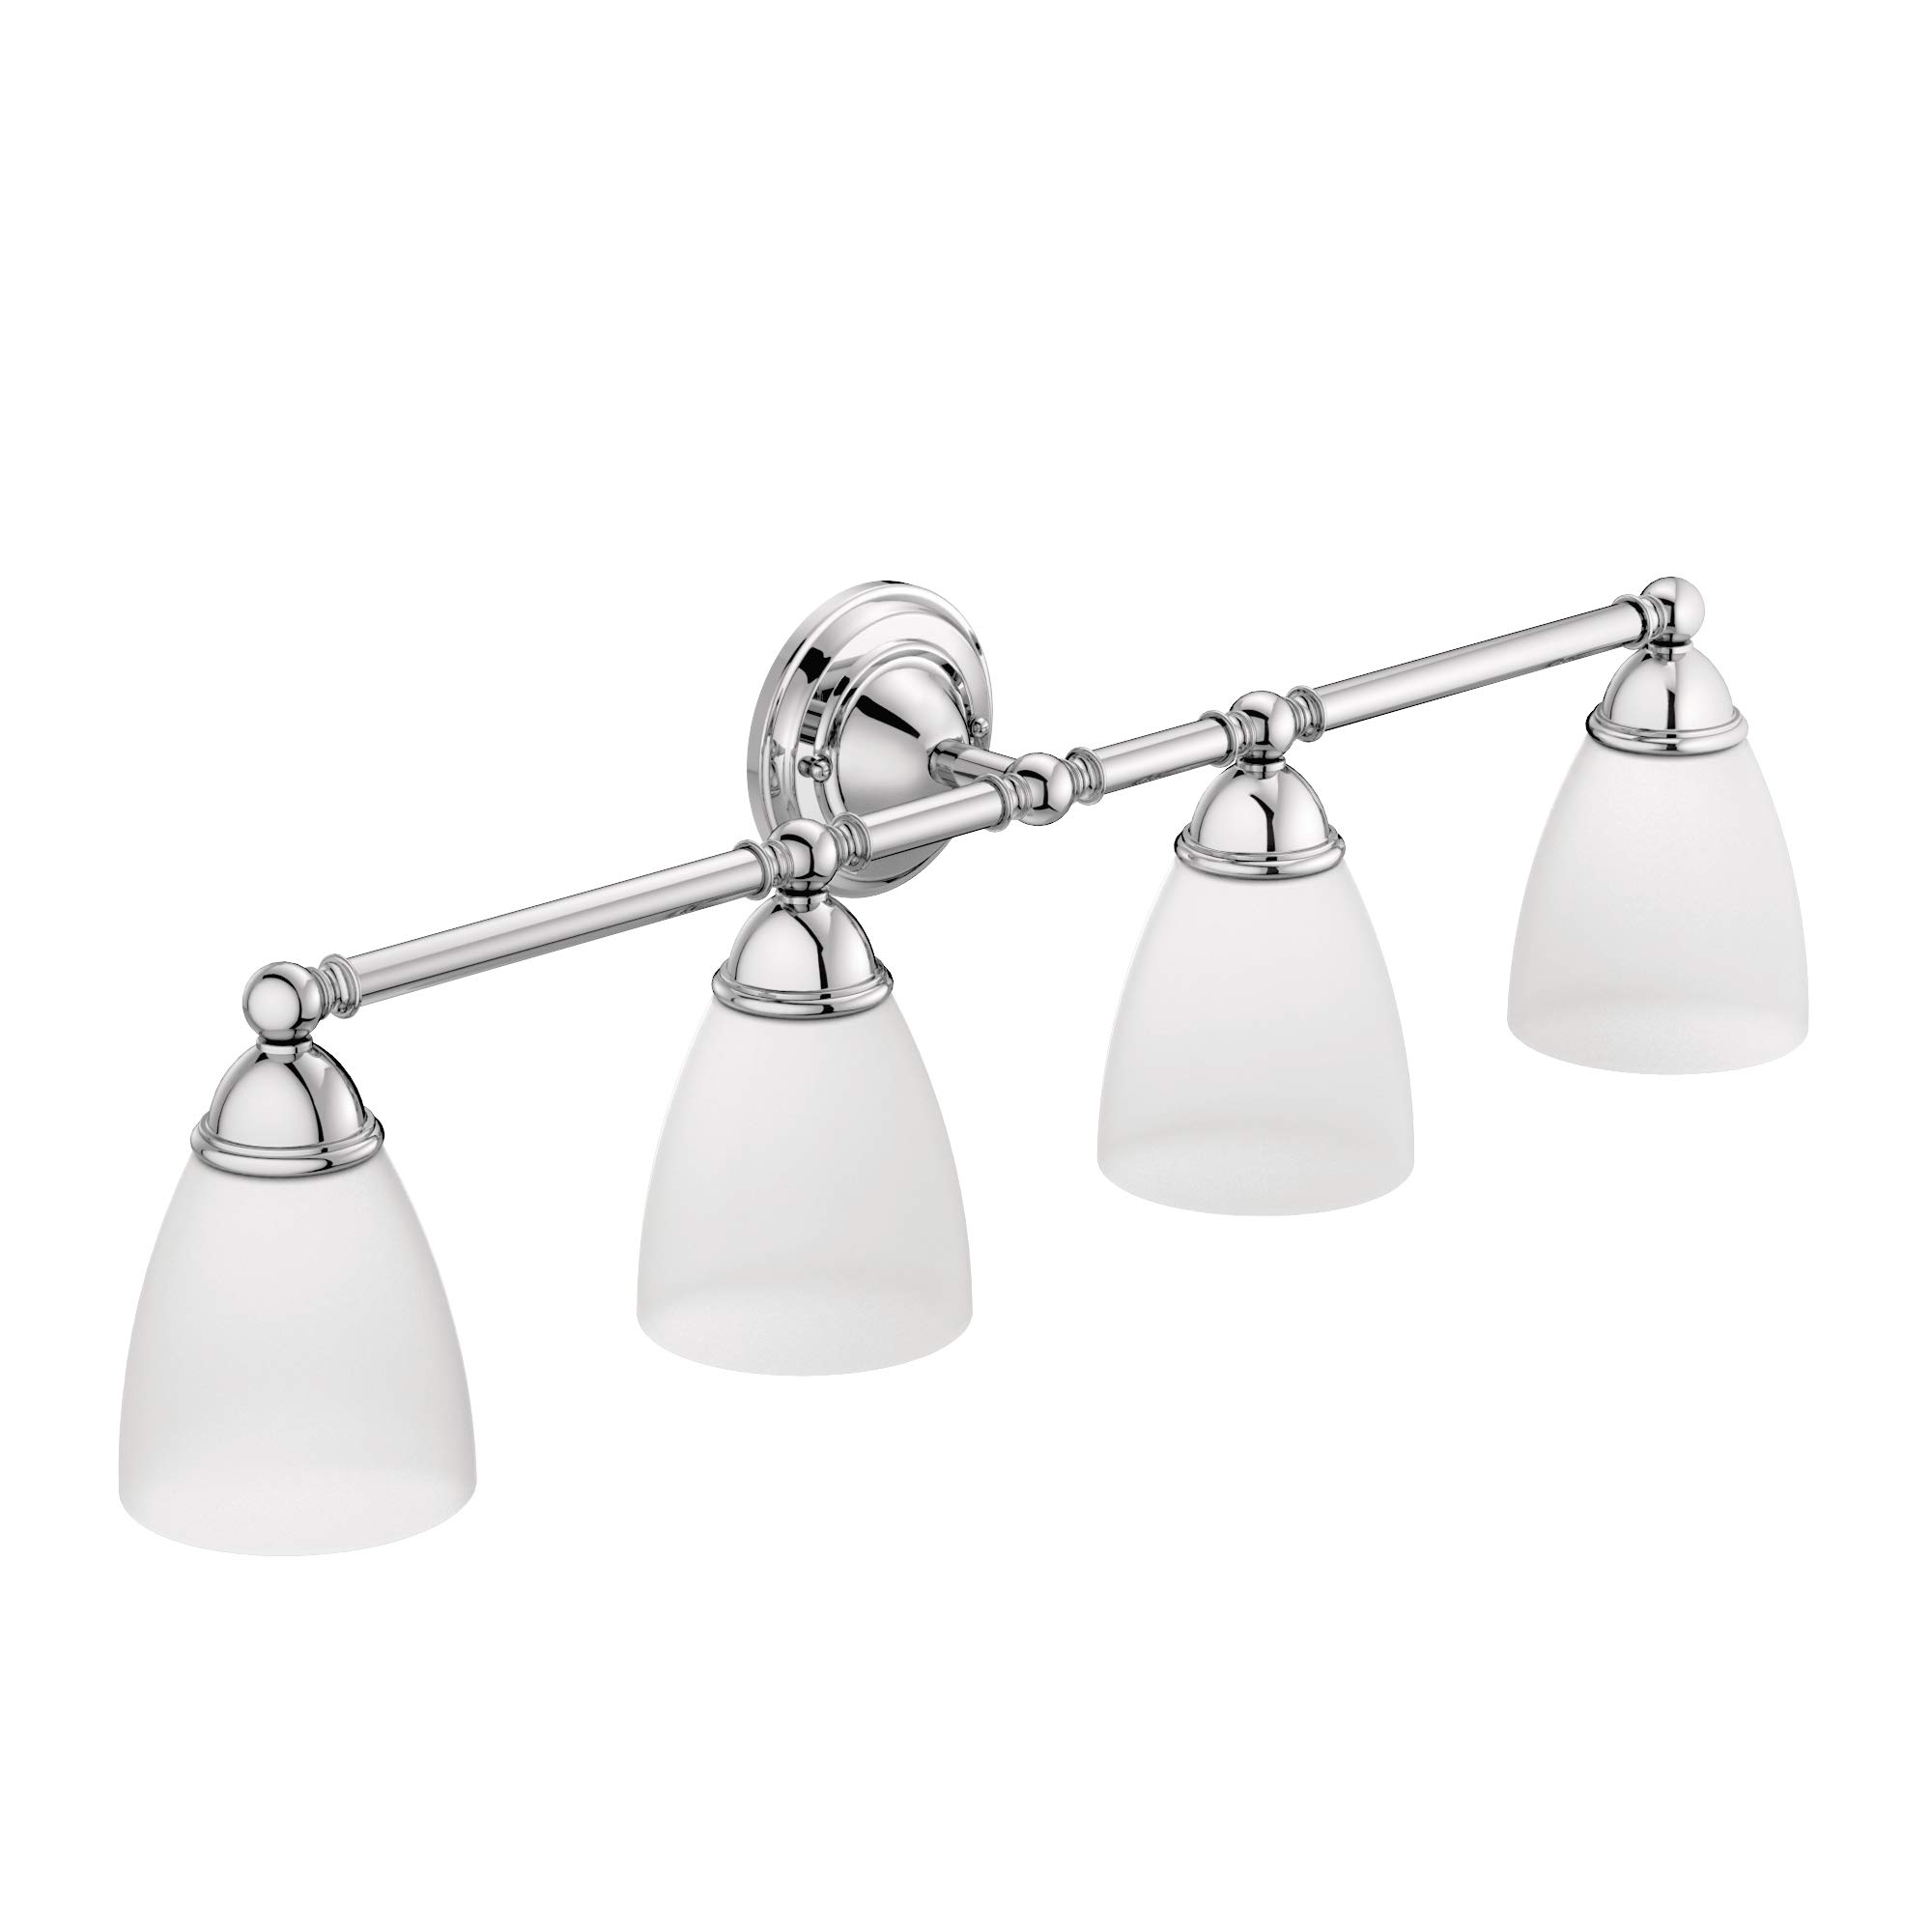 Book Cover Moen YB2264CH Brantford 4-Light Dual-Mount Bathroom Vanity Fixture with Frosted Glass, Chrome